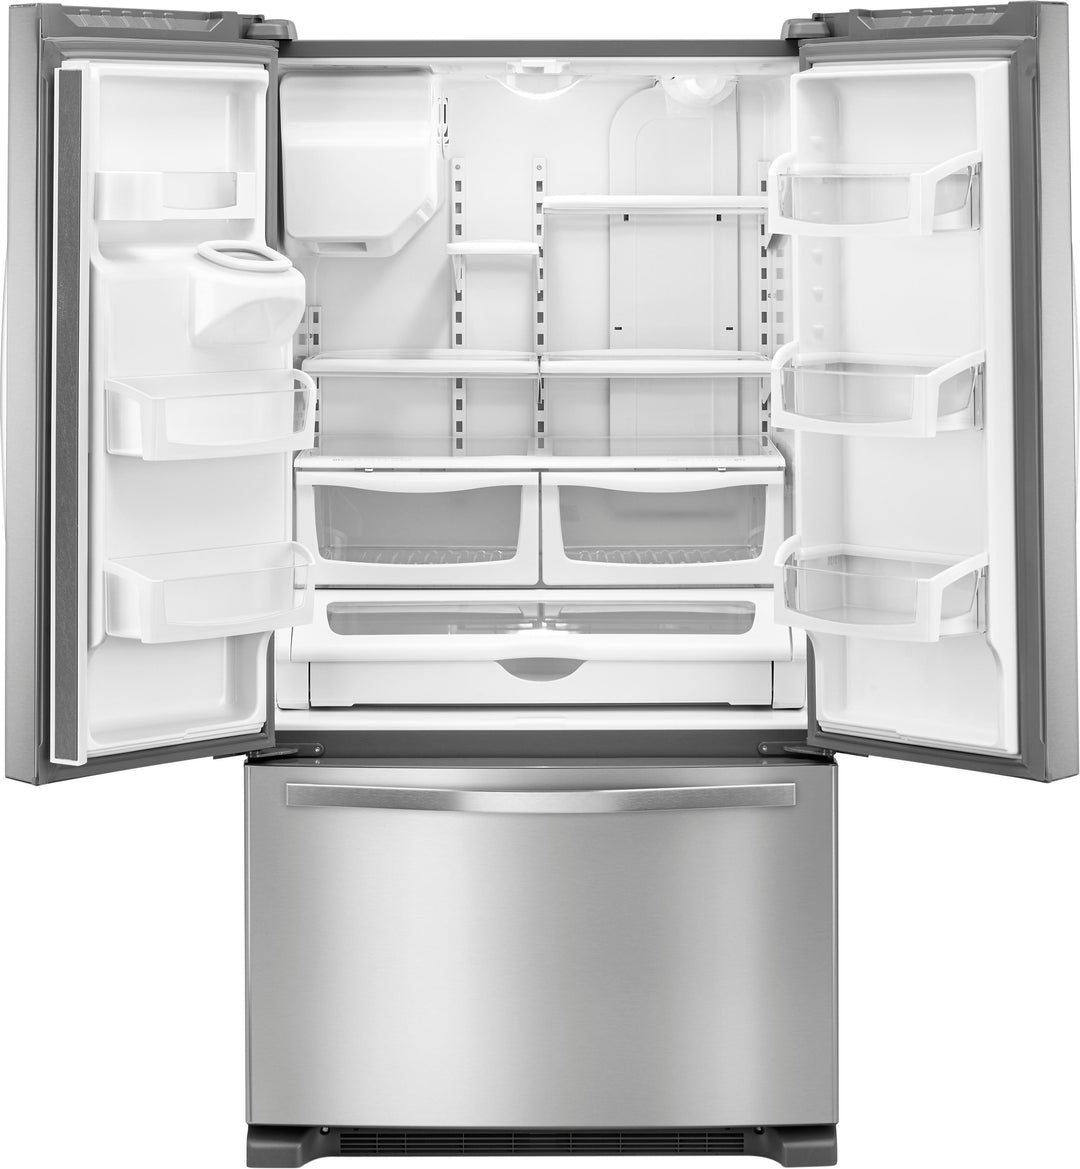 Whirlpool - 24.7 Cu. Ft. French Door Refrigerator - Stainless steel_10